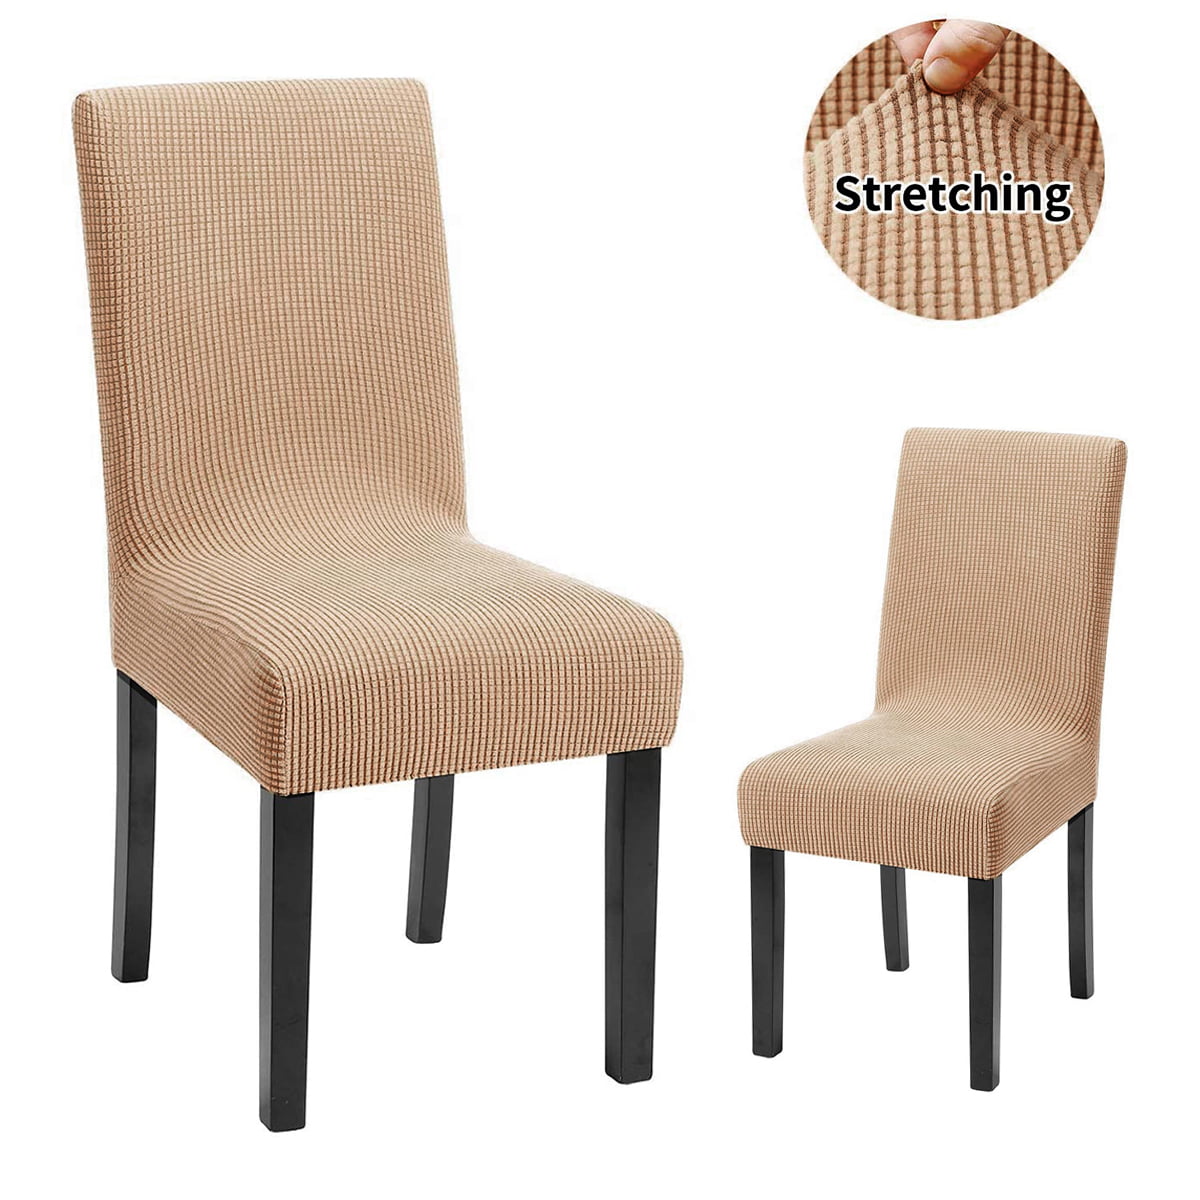 Stretch Dining Seat Chair Covers Slipcover Protector Cover Wedding Home Decor